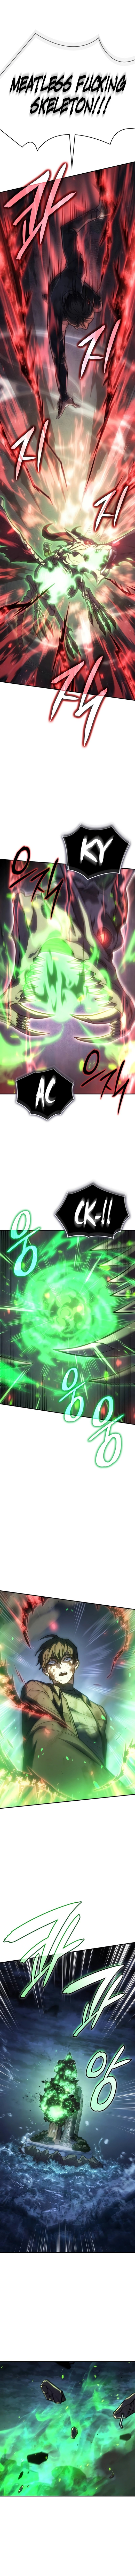 regressing-with-the-kings-power-chap-31-18